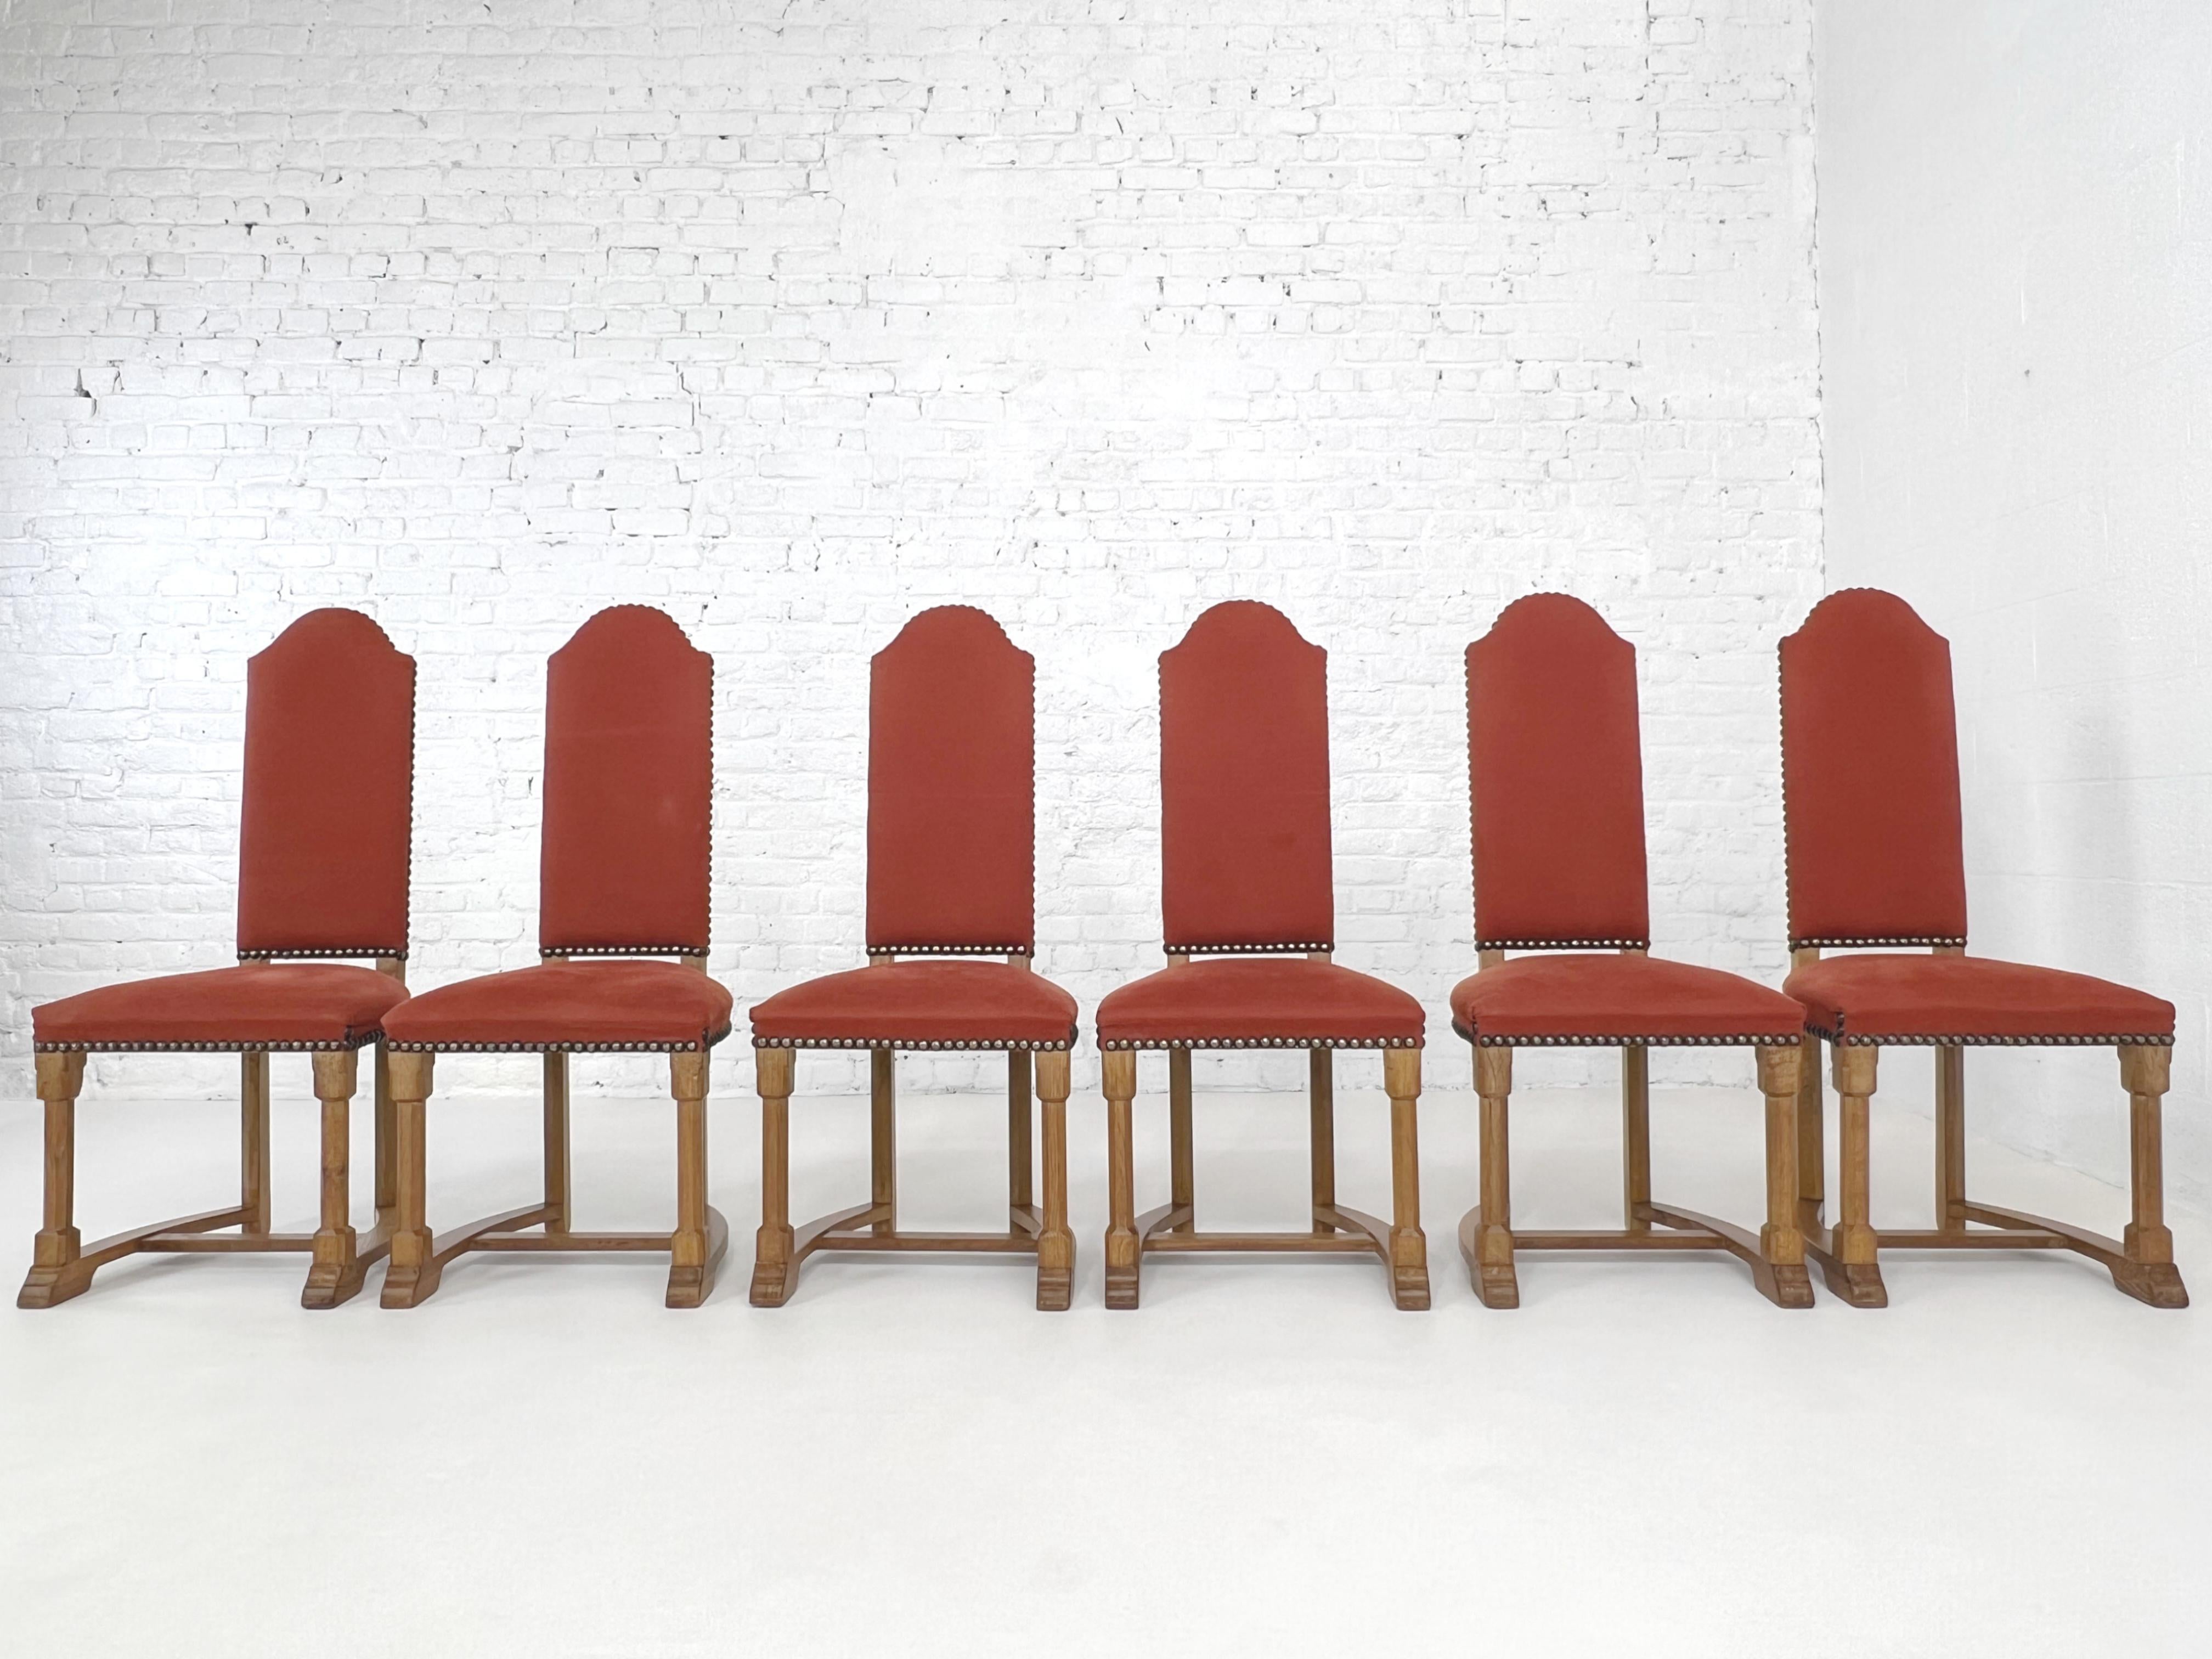 French Antic Louis XIII Style Wooden And Fabric Set of 6 Chairs With Their 2 Matching Armchairs composed of a curved and sculpted wooden high back structure adorned with brick red fabric.